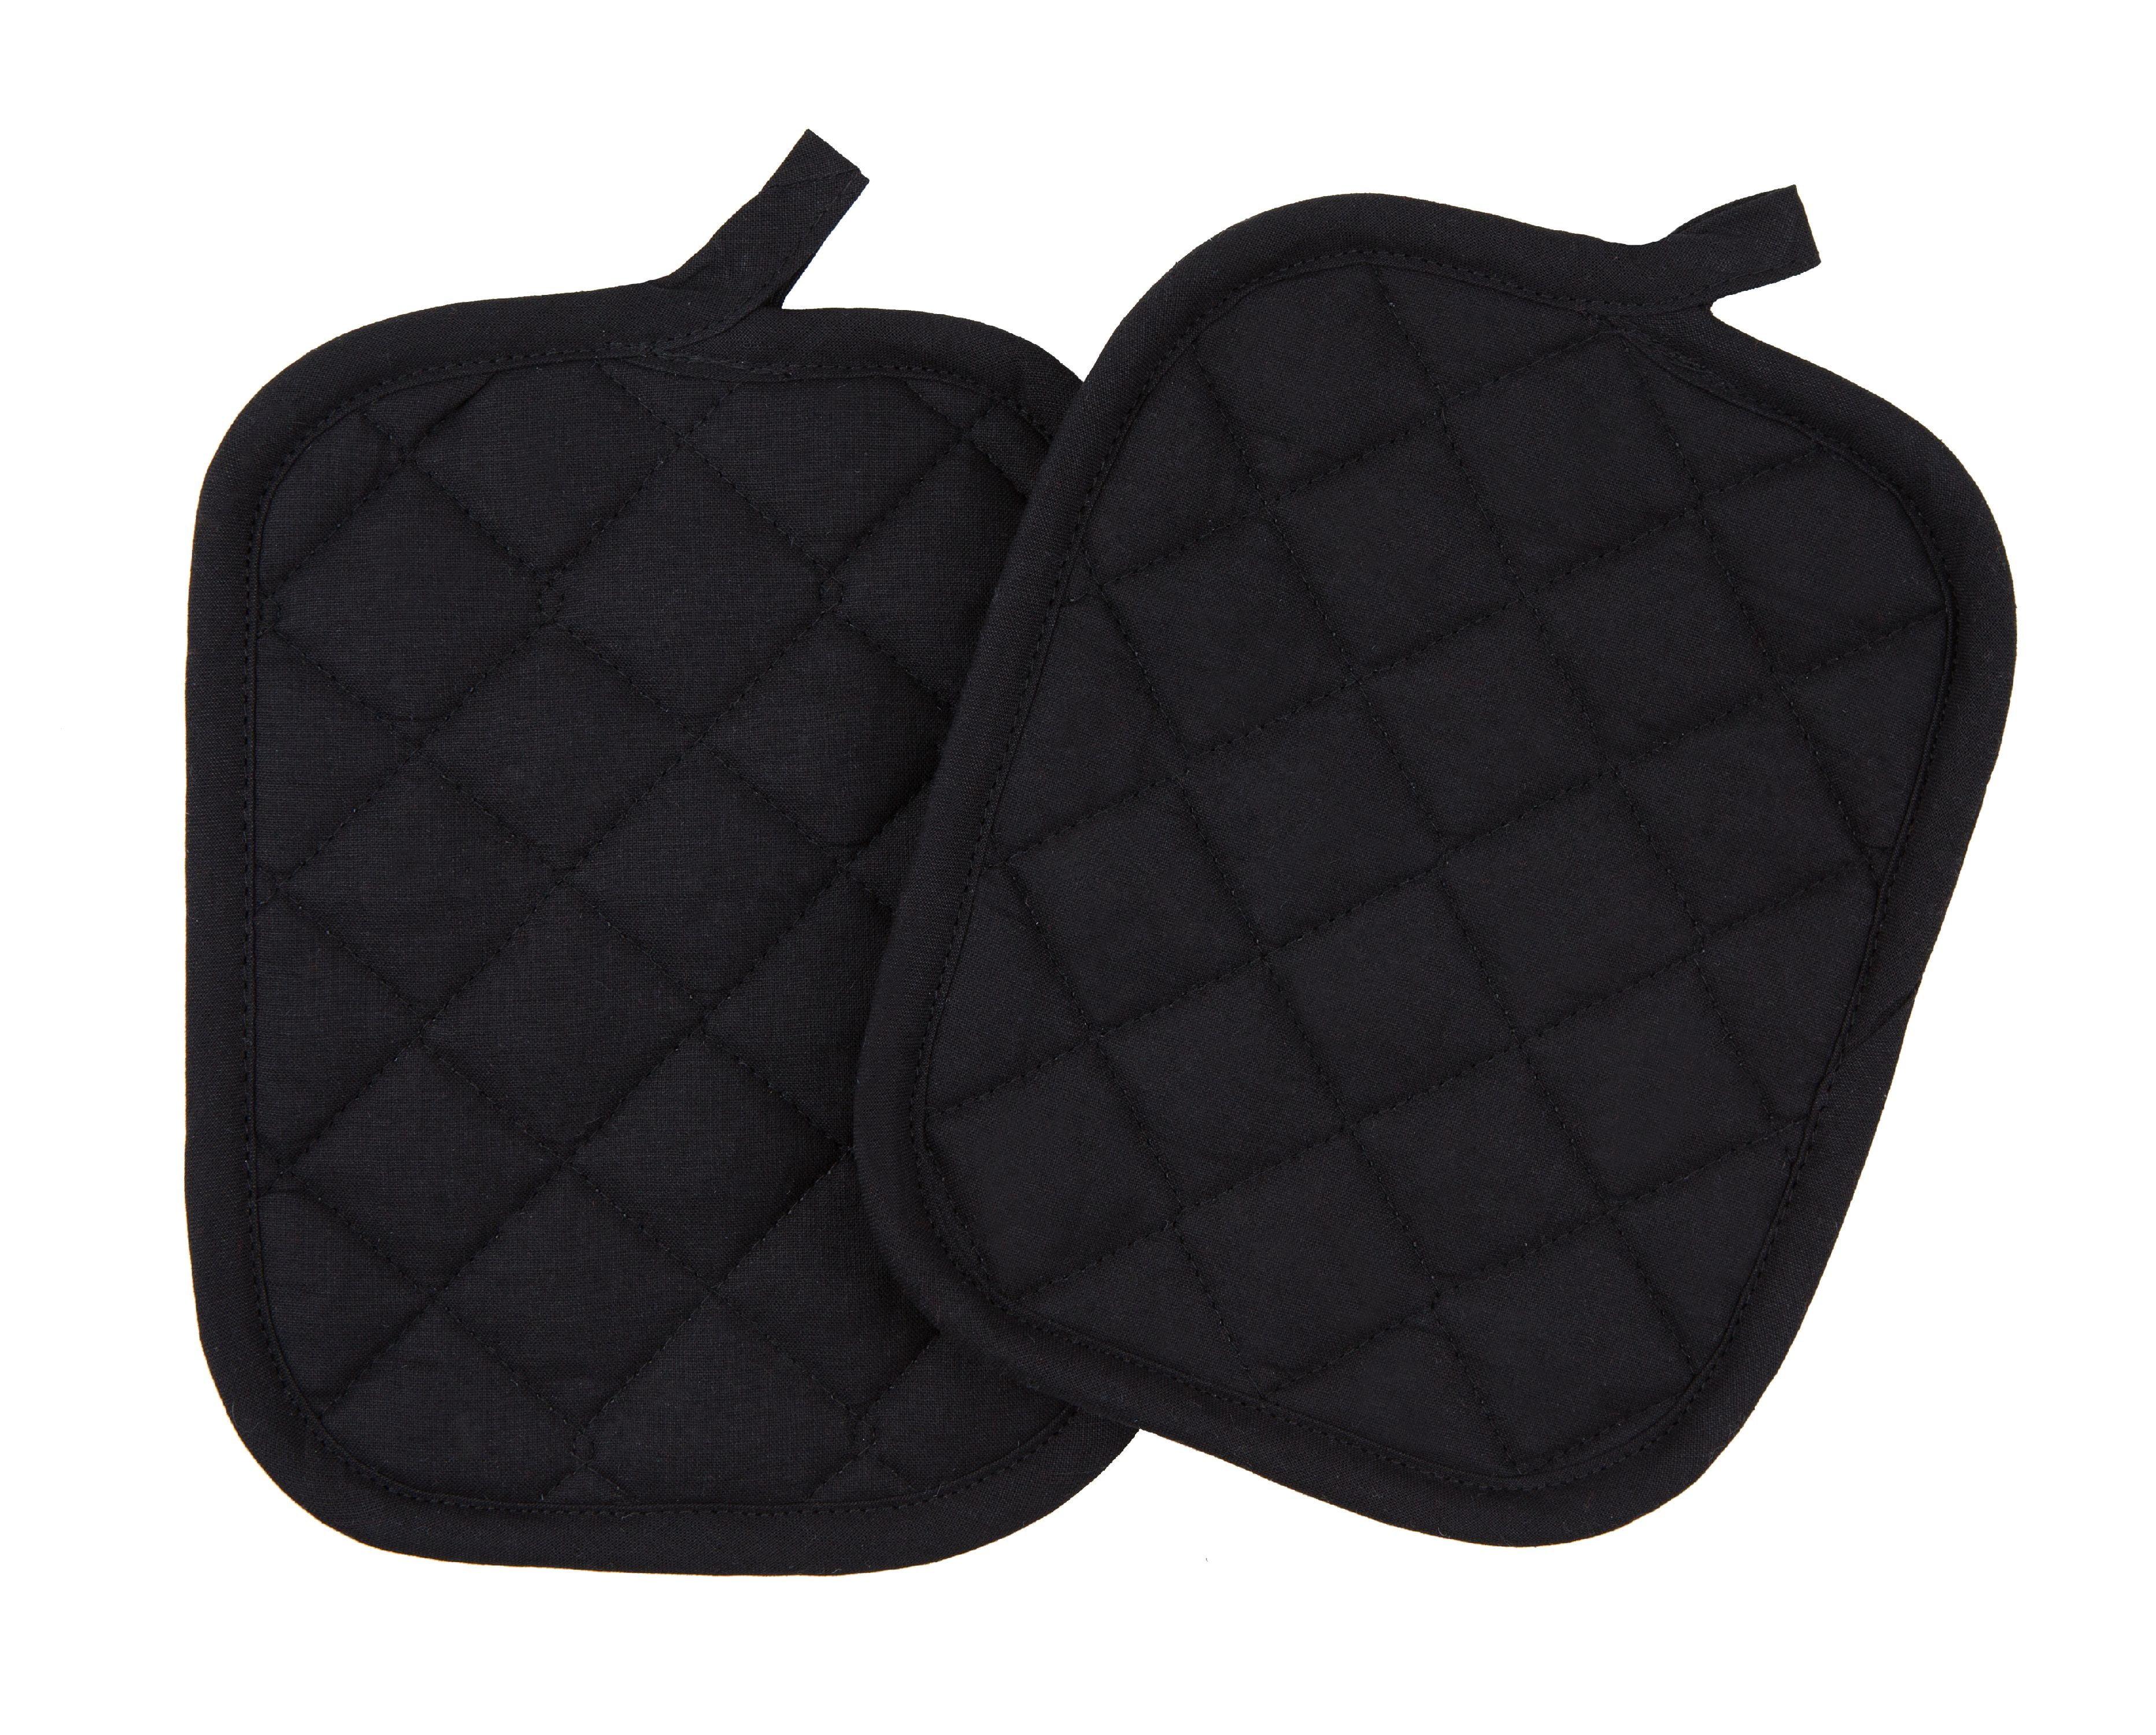 New KitchenAid Black Set of 7 Oven Mitts, Pot Holders and Towels